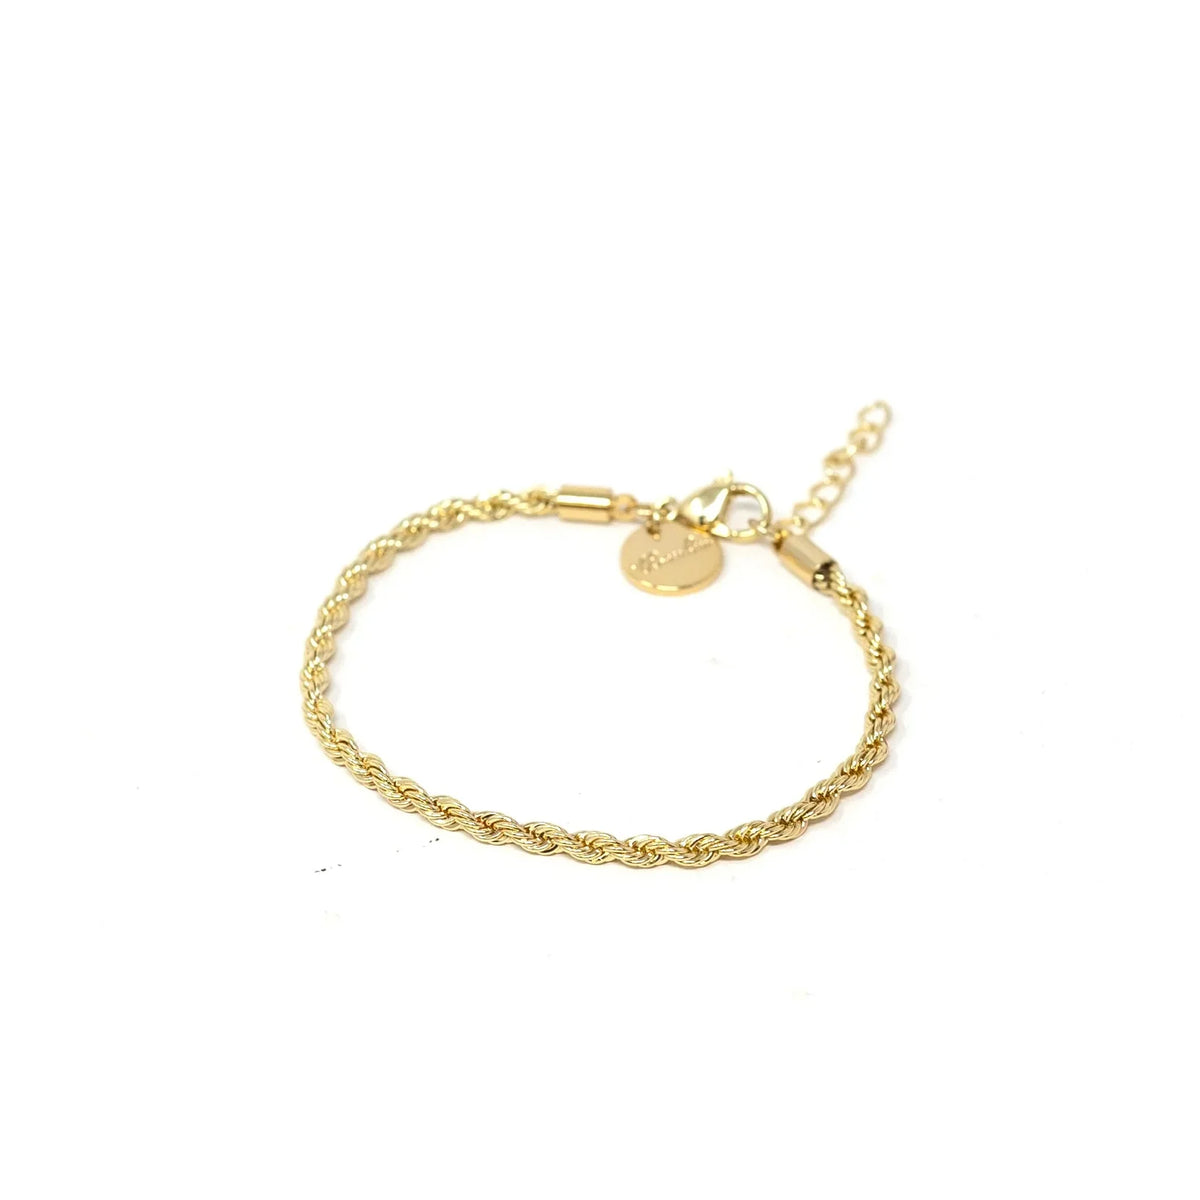 'The Clara' Mini Rope Chain Bracelet (2 Colors)-A dainty rope chain style bracelet in gold & silver for your everyday simple outfits or a layer to your stack!-Cali Moon Boutique, Plainville Connecticut